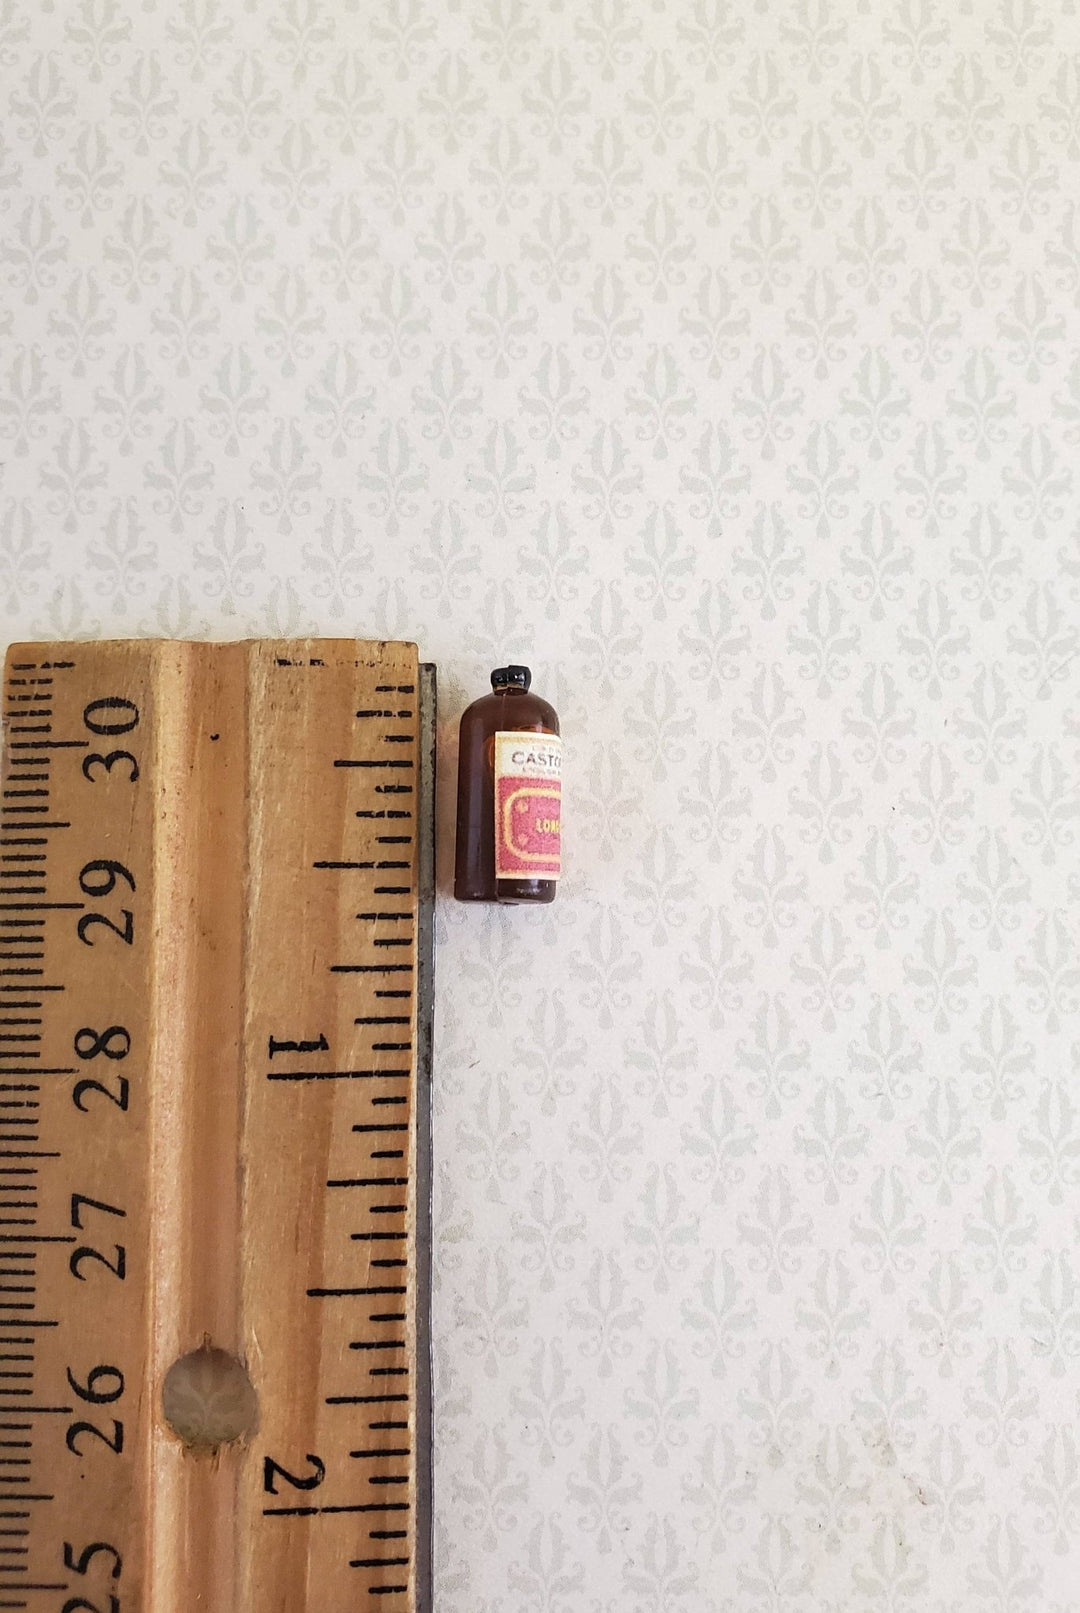 Dollhouse Miniature Castor Oil Old Fashion Style 1:12 Scale Food Groceries Kitchen - Miniature Crush